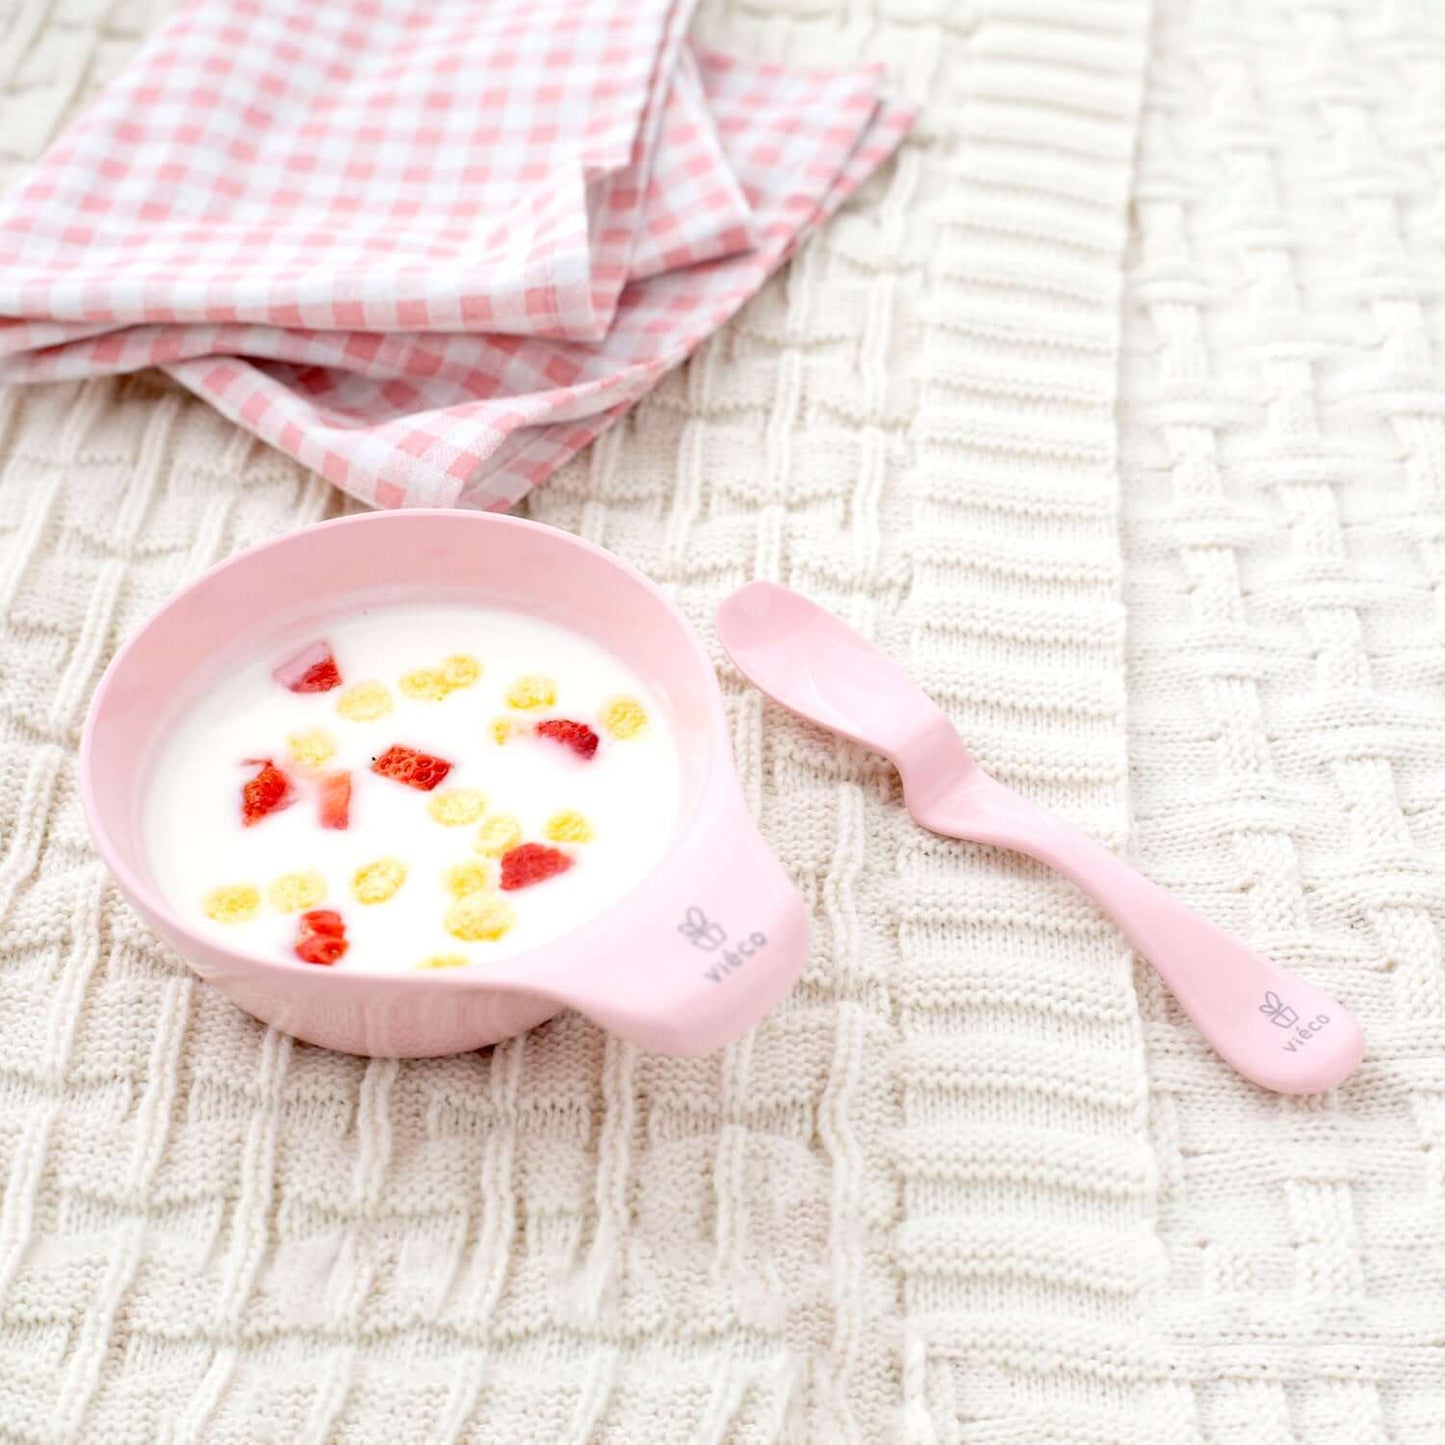 Viéco Baby Feeding Spoon and Bowl Set_Rosy Pink